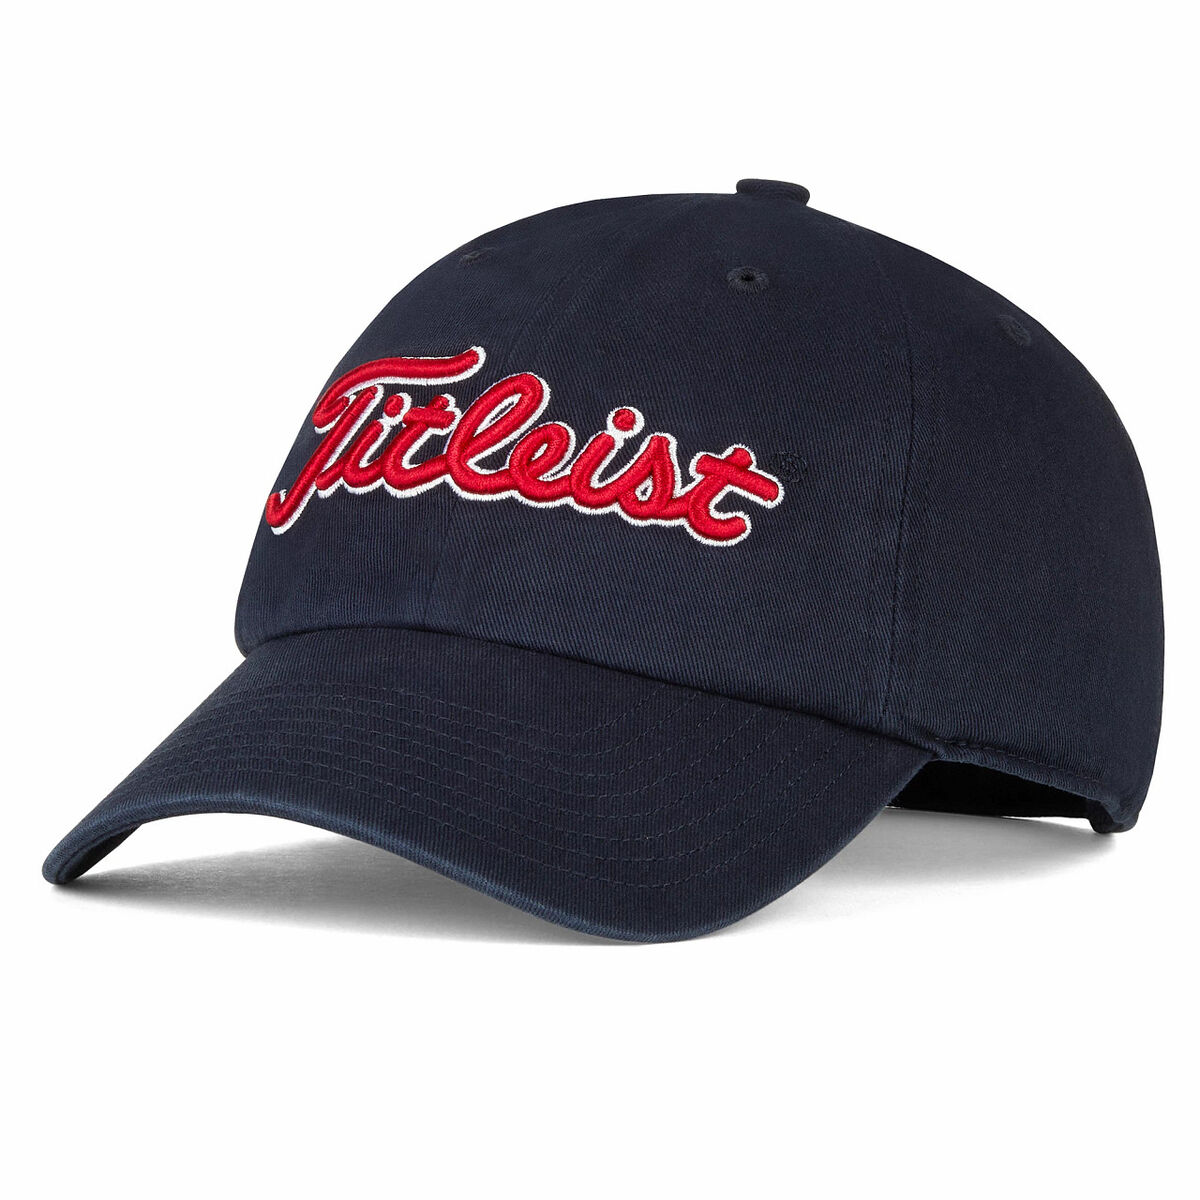 Titleist MLB Clean Up Hat - Red Sox | PGA TOUR Superstore